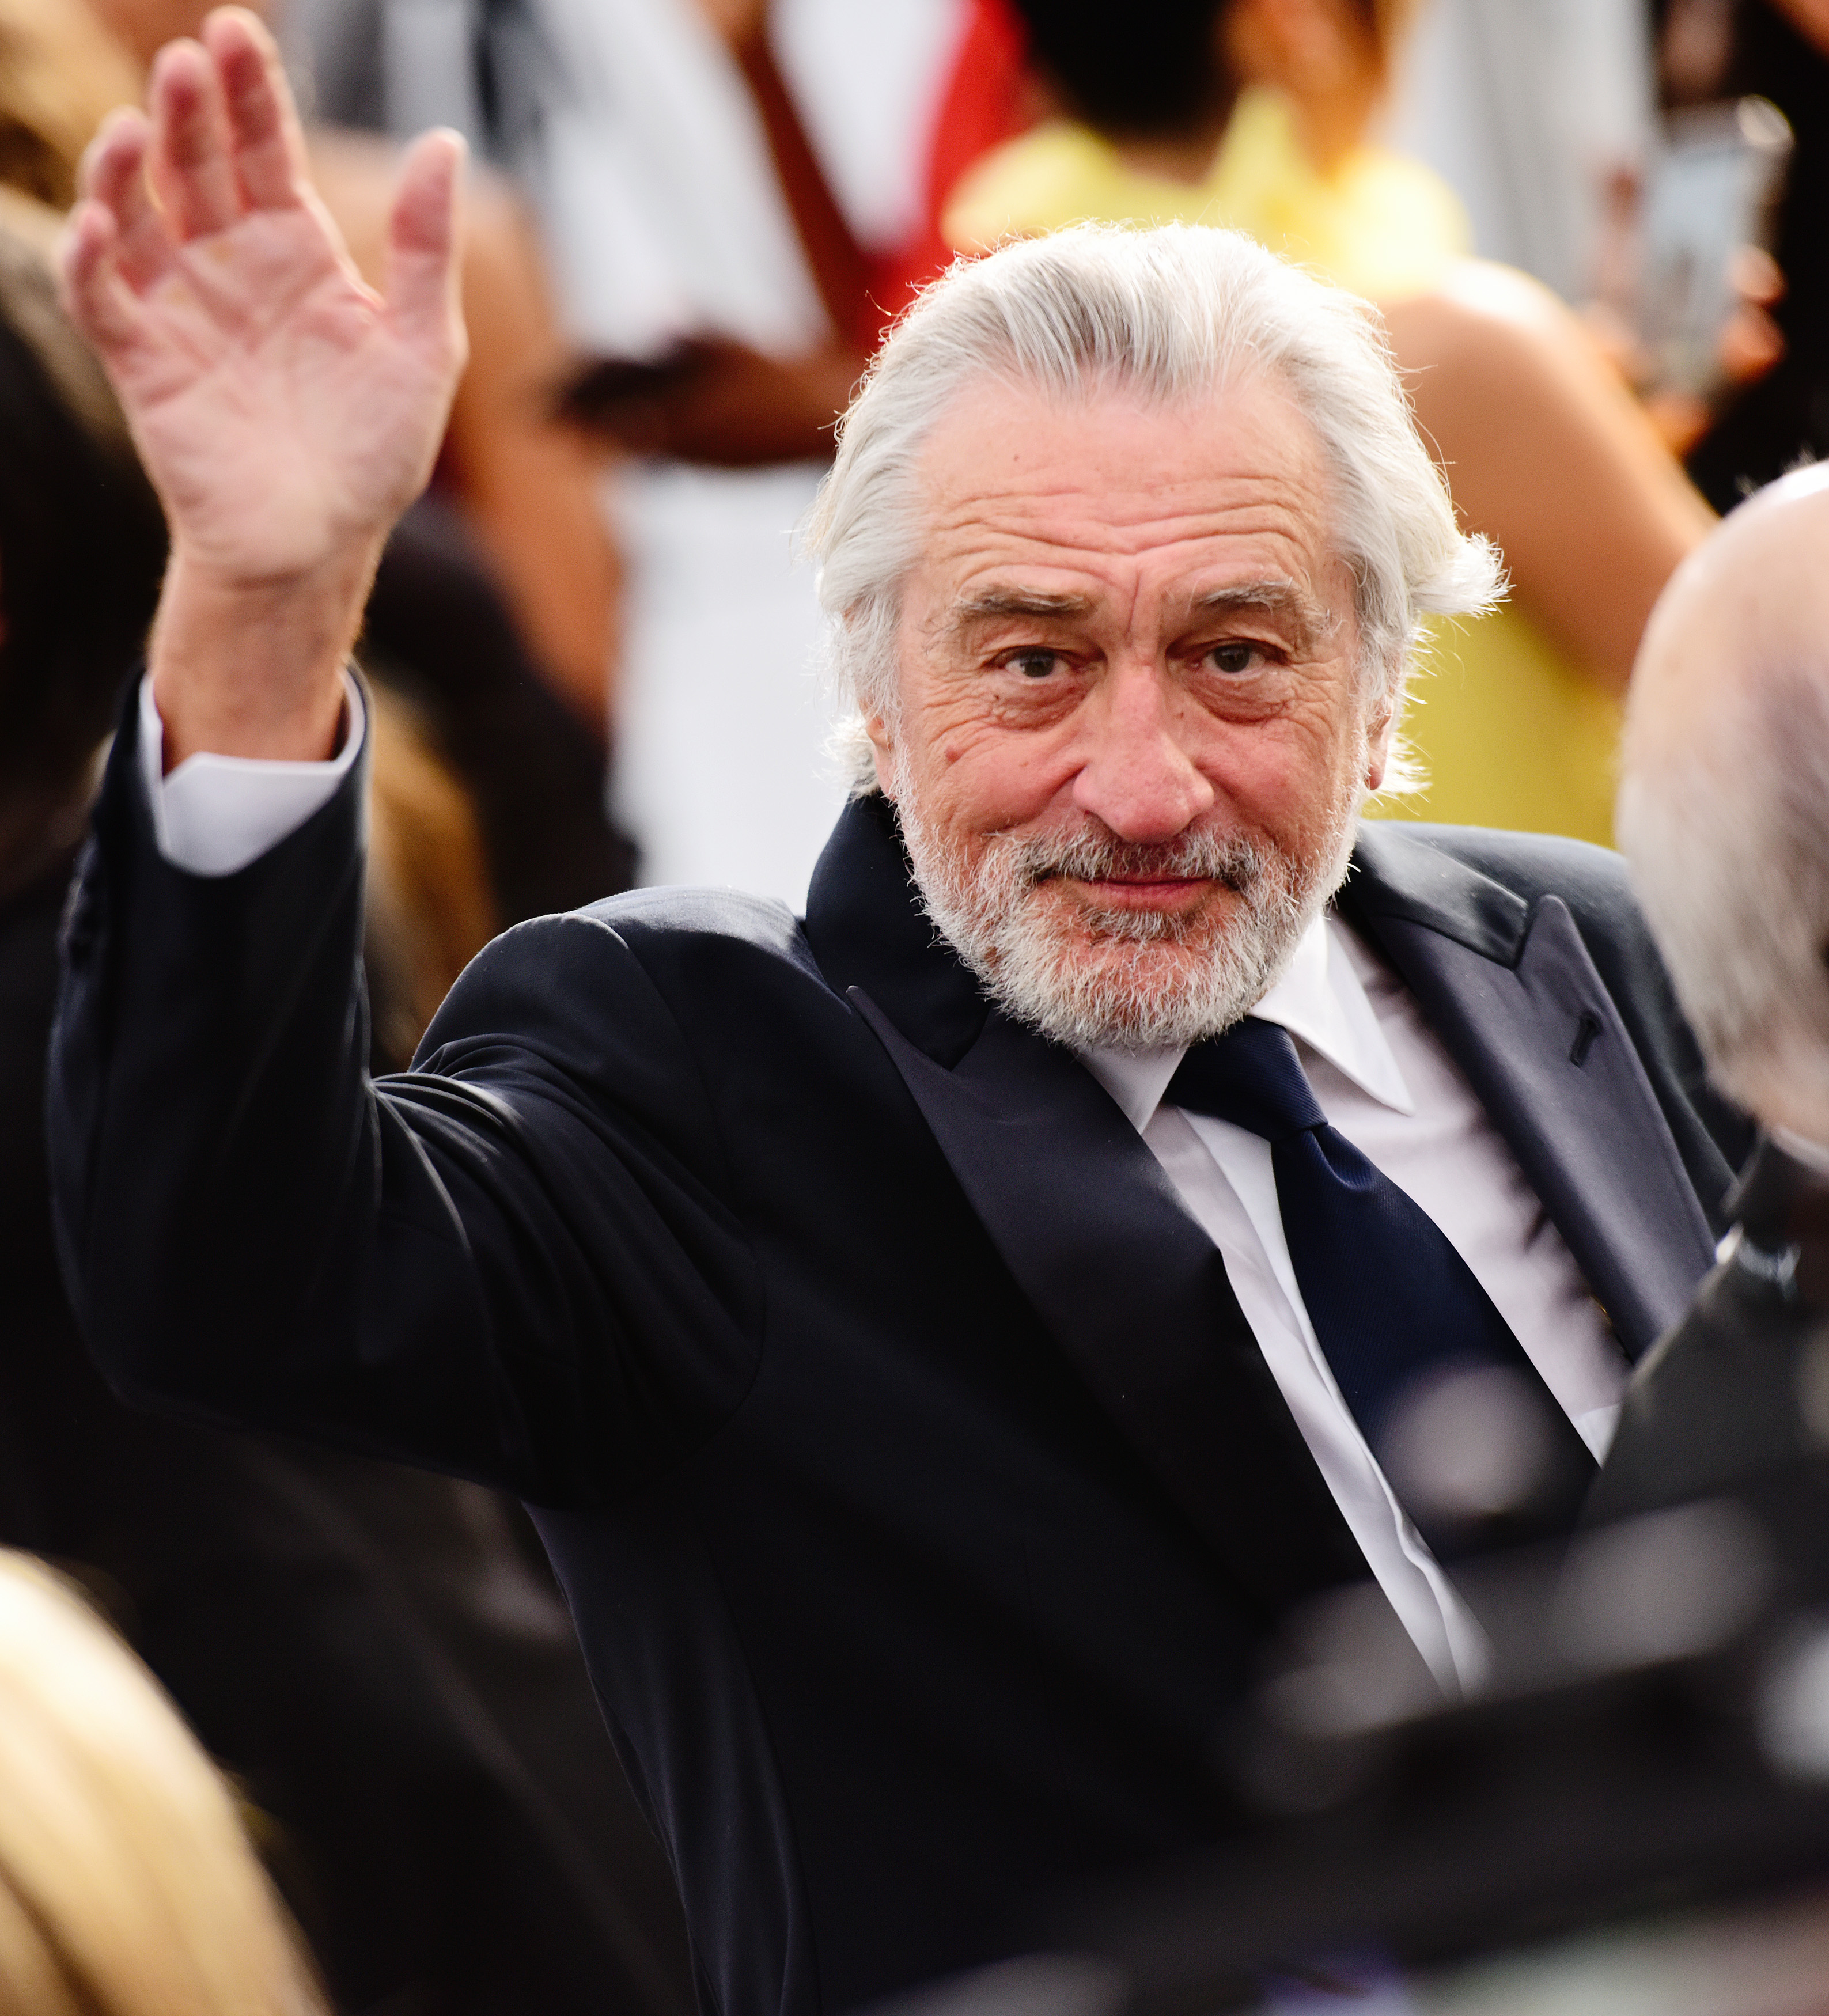 Robert De Niro in Los Angeles, California on January 19, 2020 | Source: Getty Images